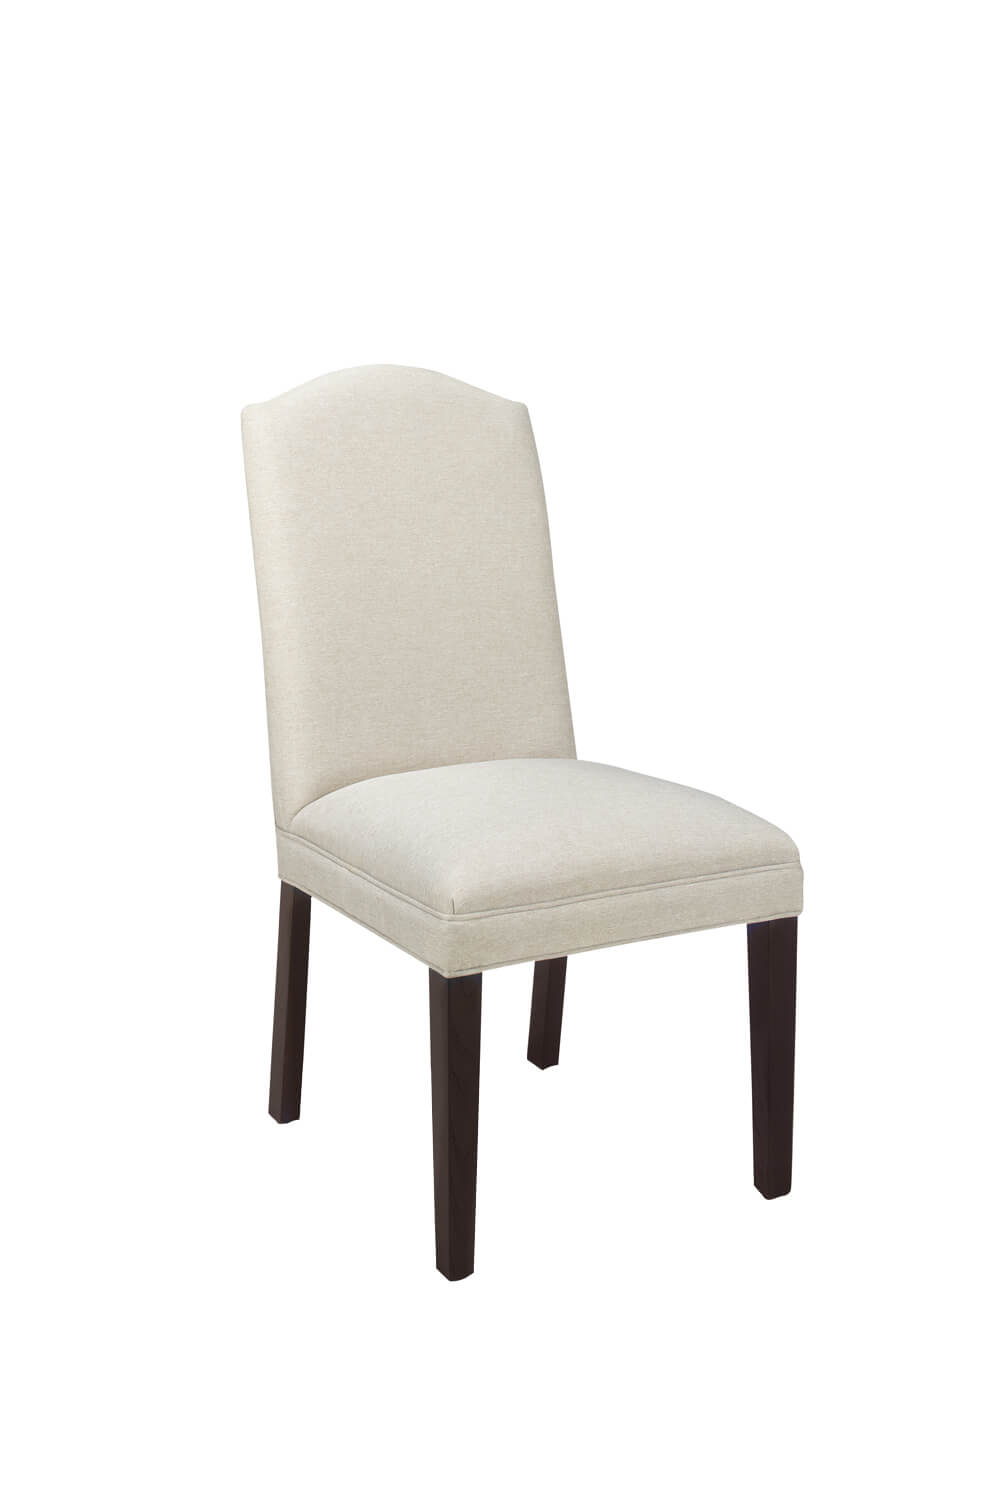 #802 Modern Upholstered Wood Dining Chair